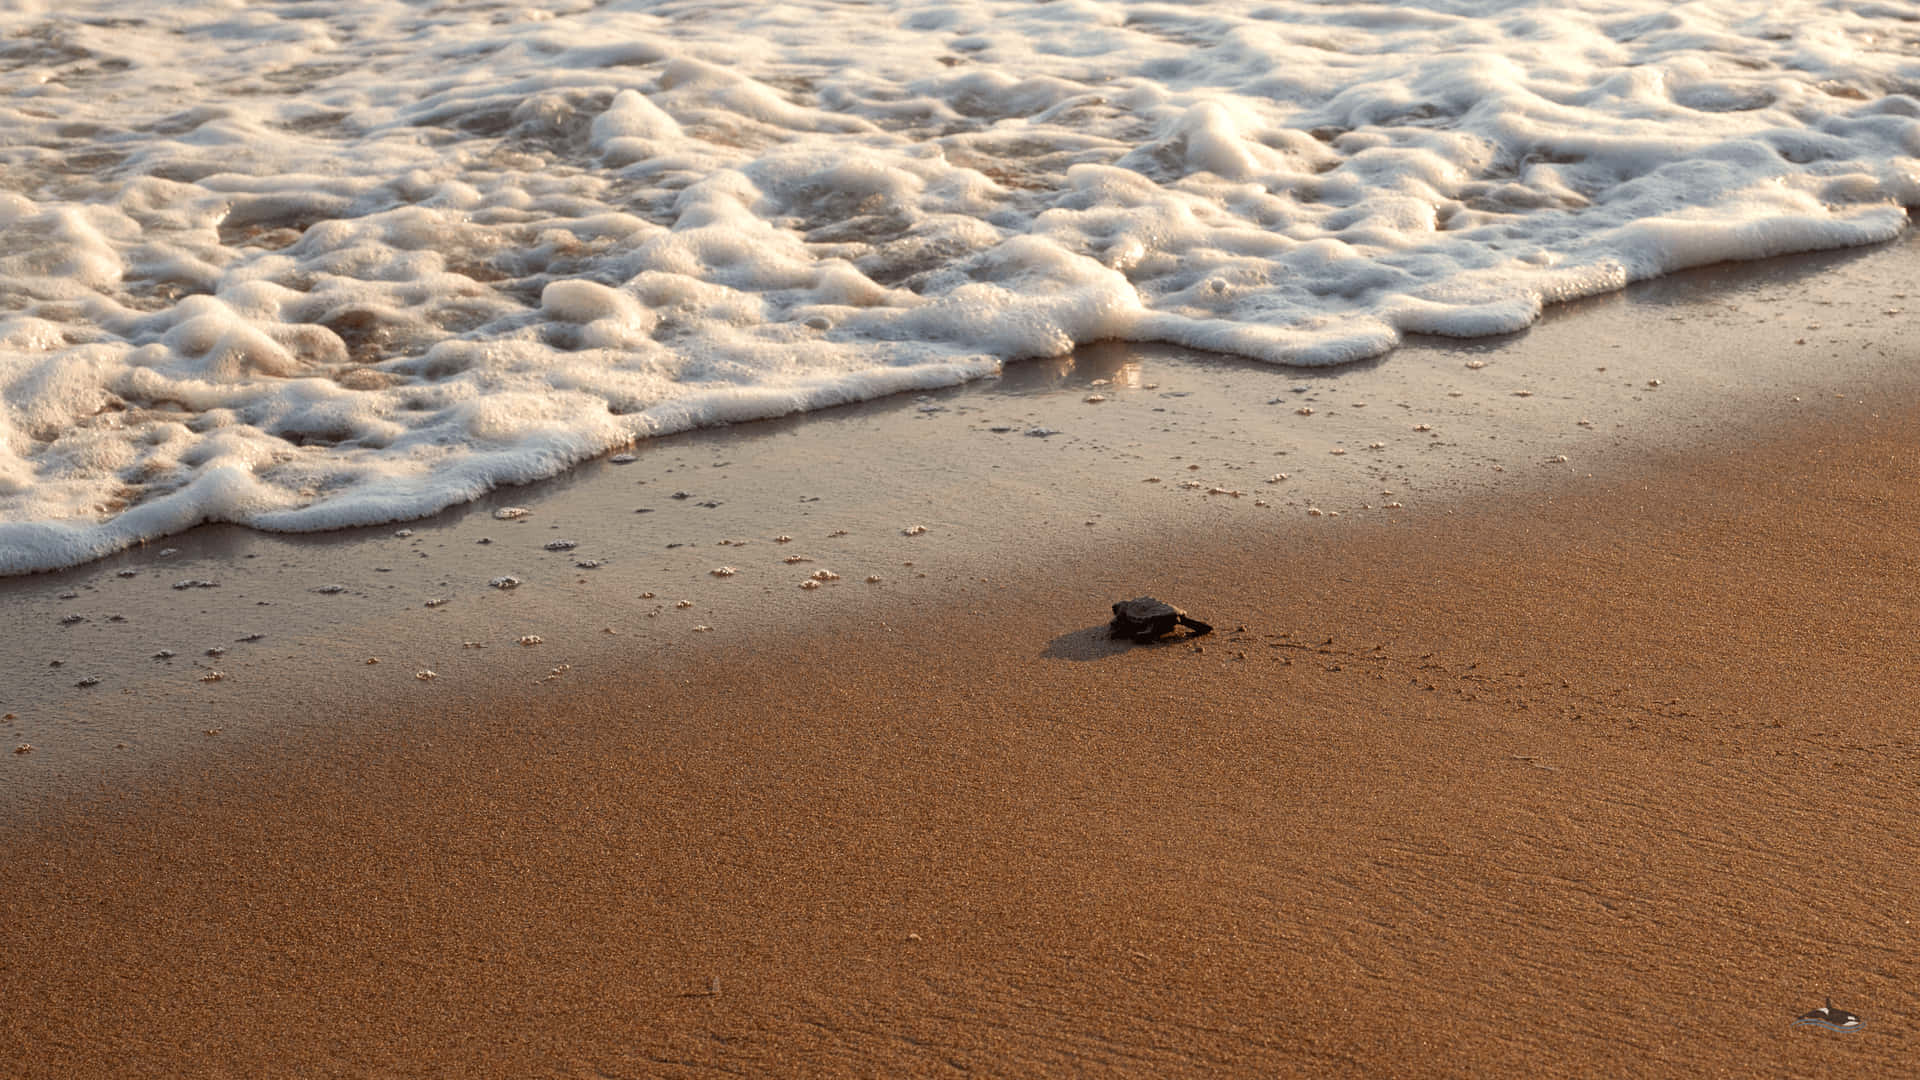 A newborn baby turtle takes its first steps Wallpaper